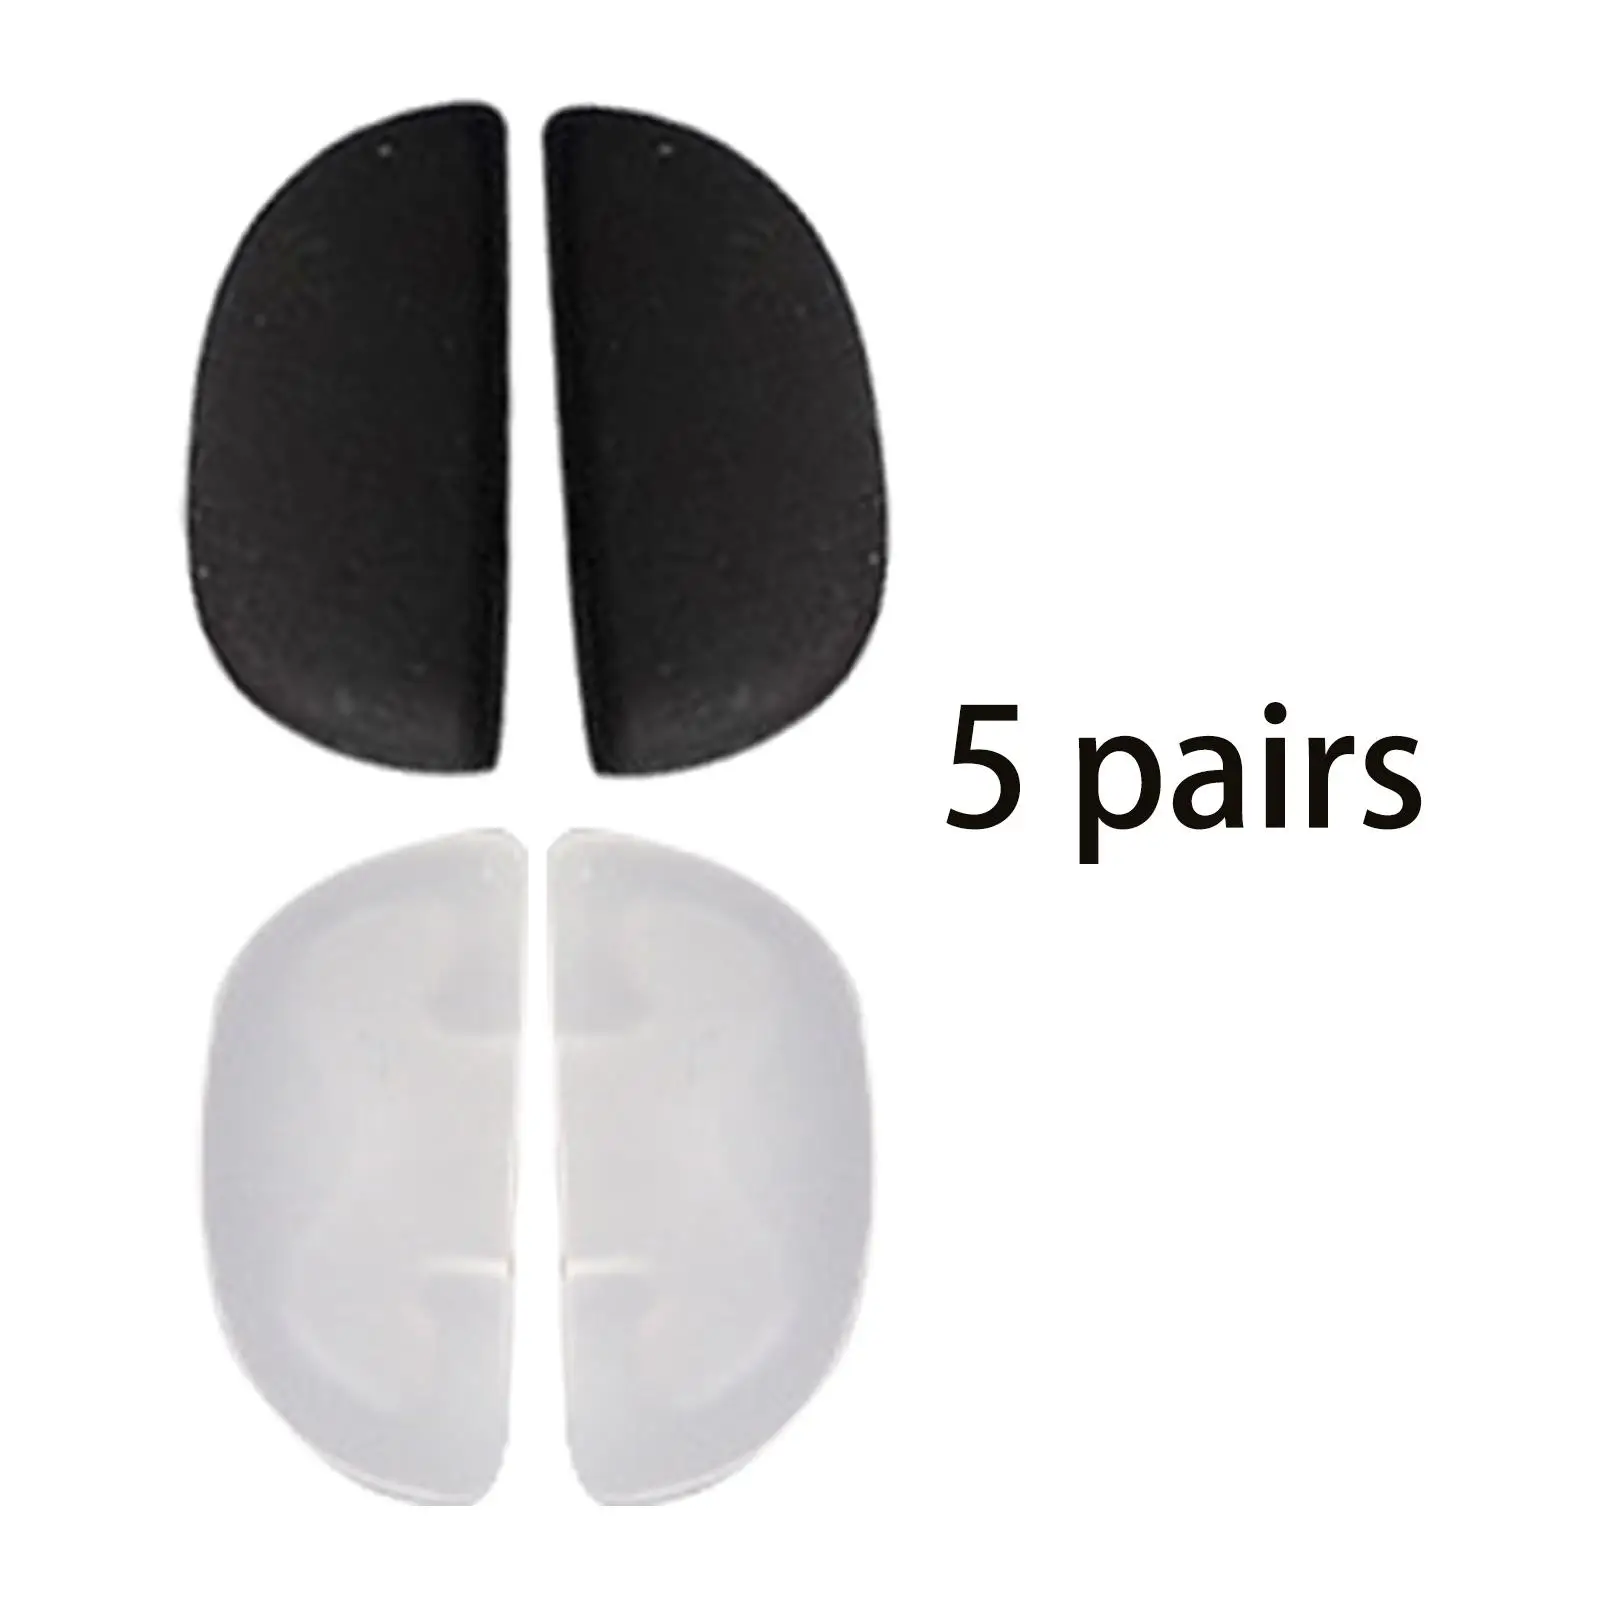 10 Pieces Silicone Children Eyeglass Nose Pads Replace Parts Comfortable Slide/Push in Contoured Soft for Sunglasses Glasses